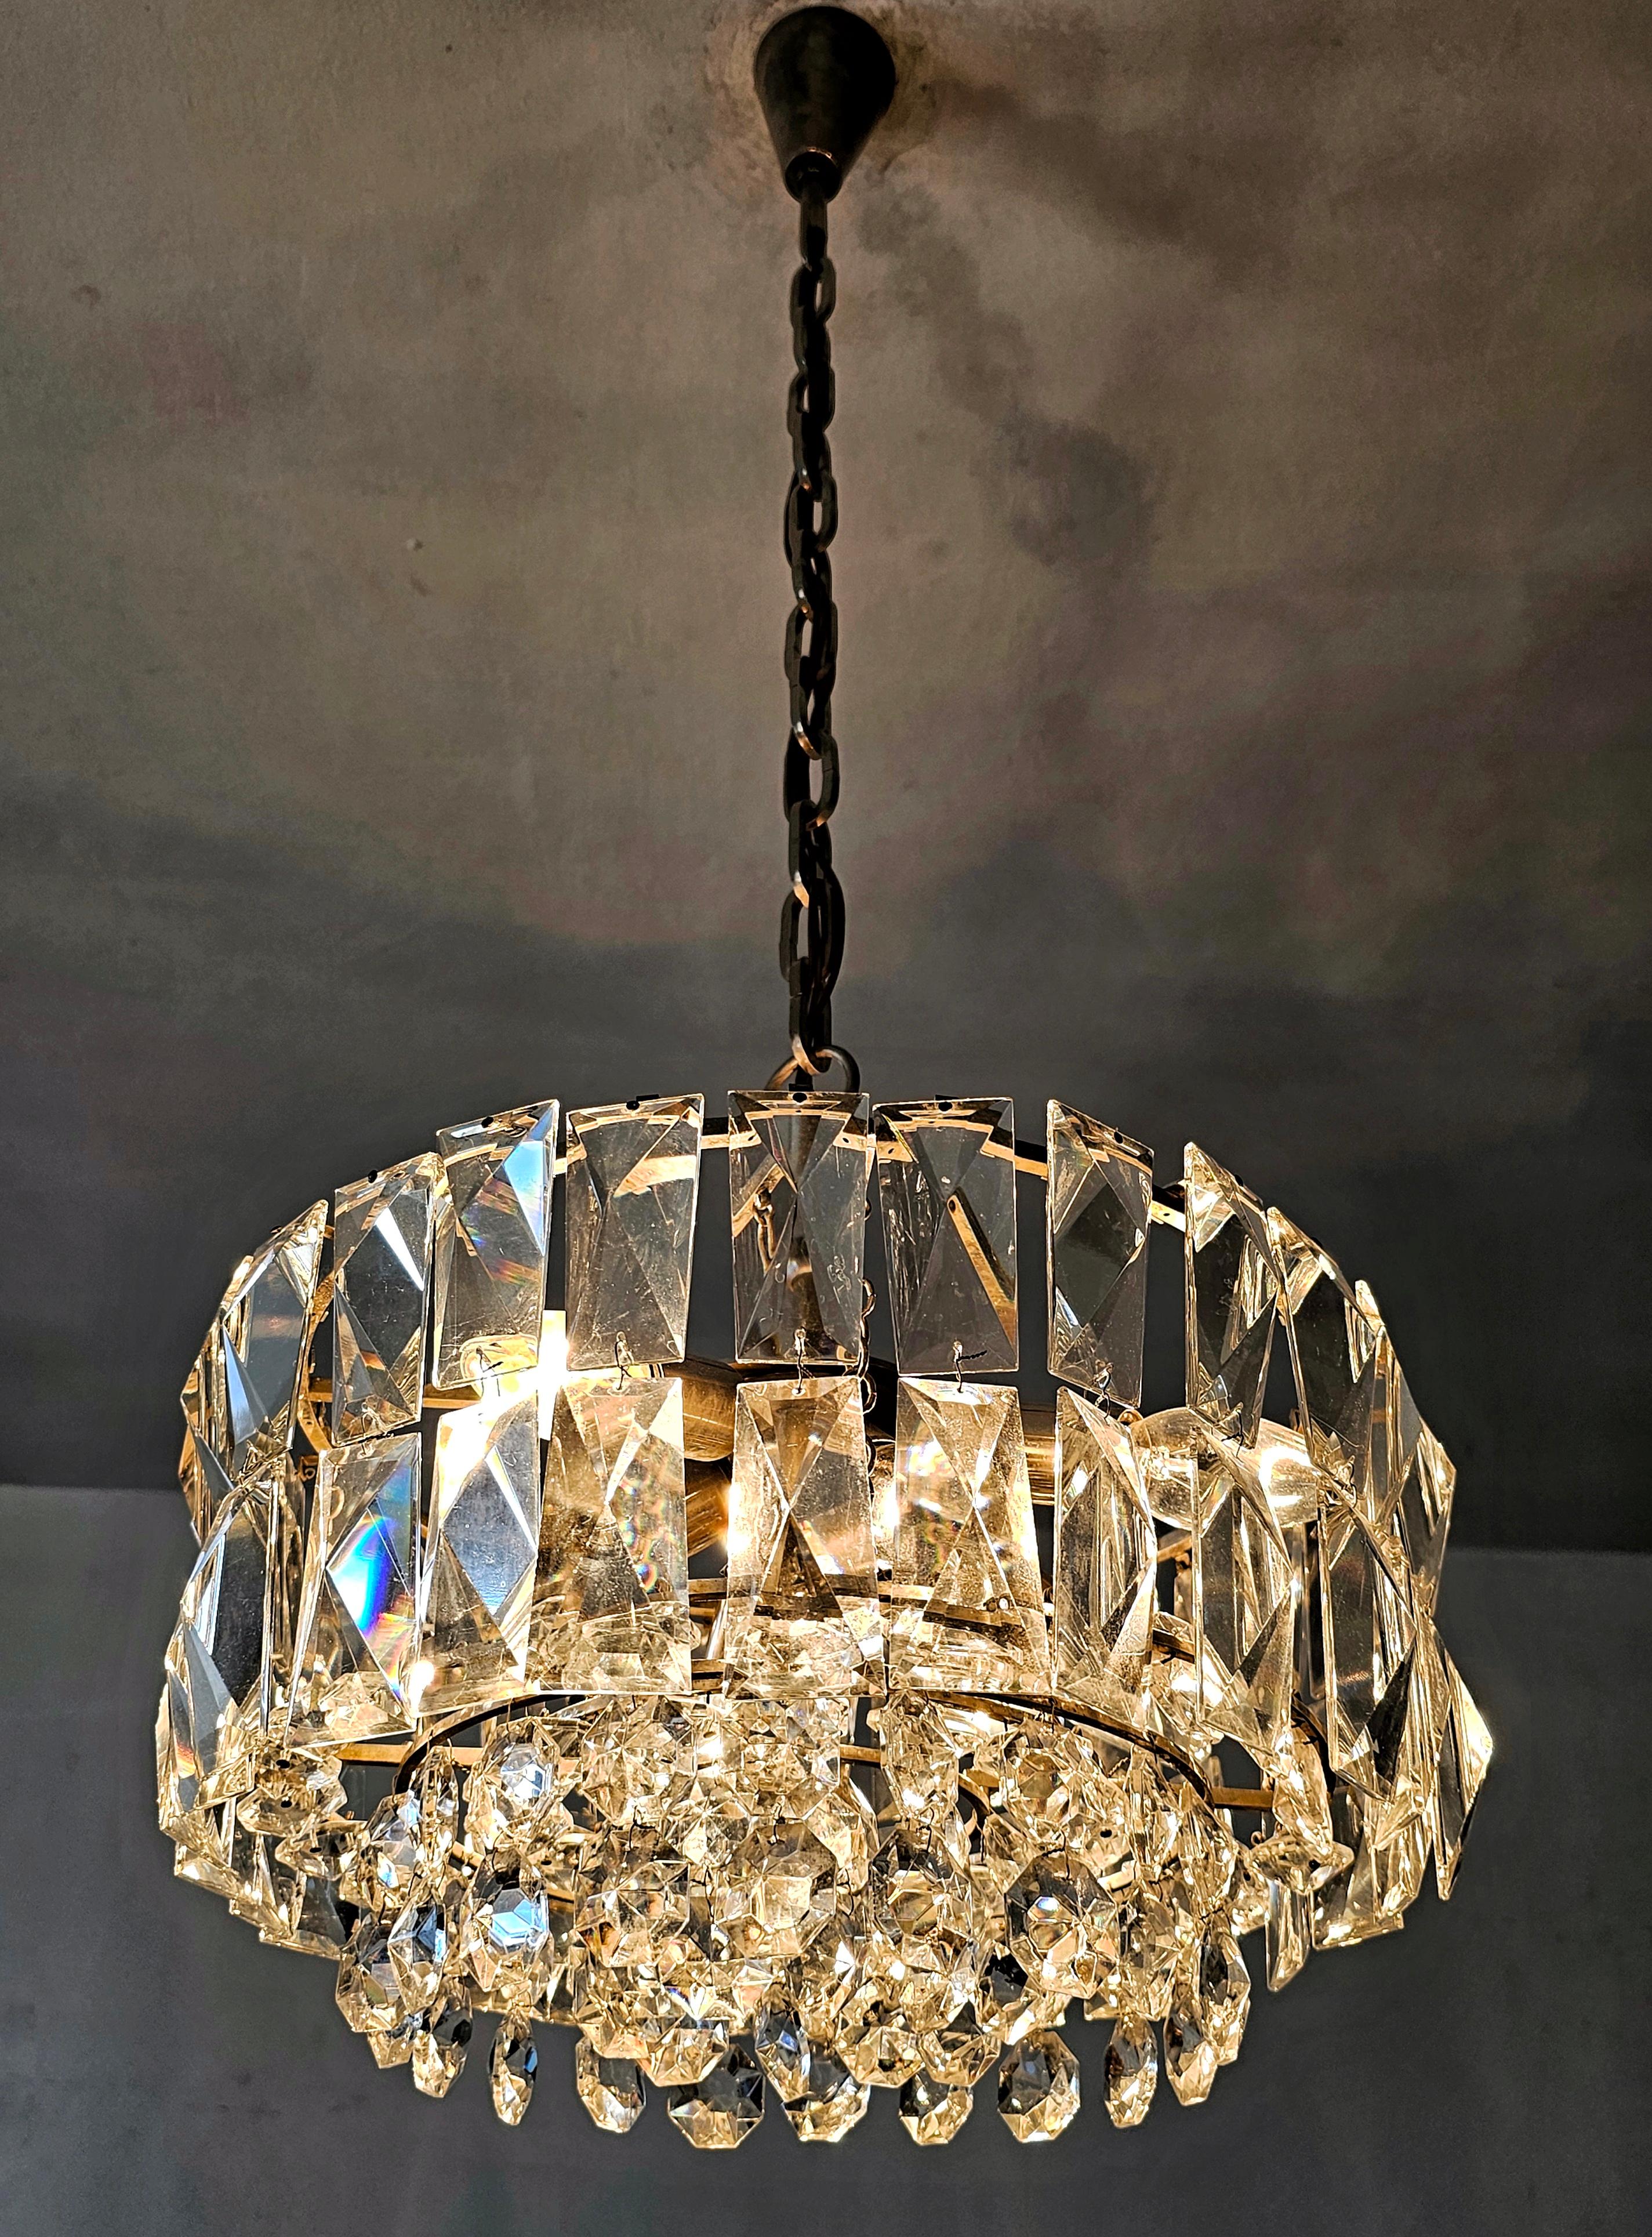 Mid Century Modern Nickel Plated Crystal Chandelier by Bakalowits, Austria 1960s For Sale 1